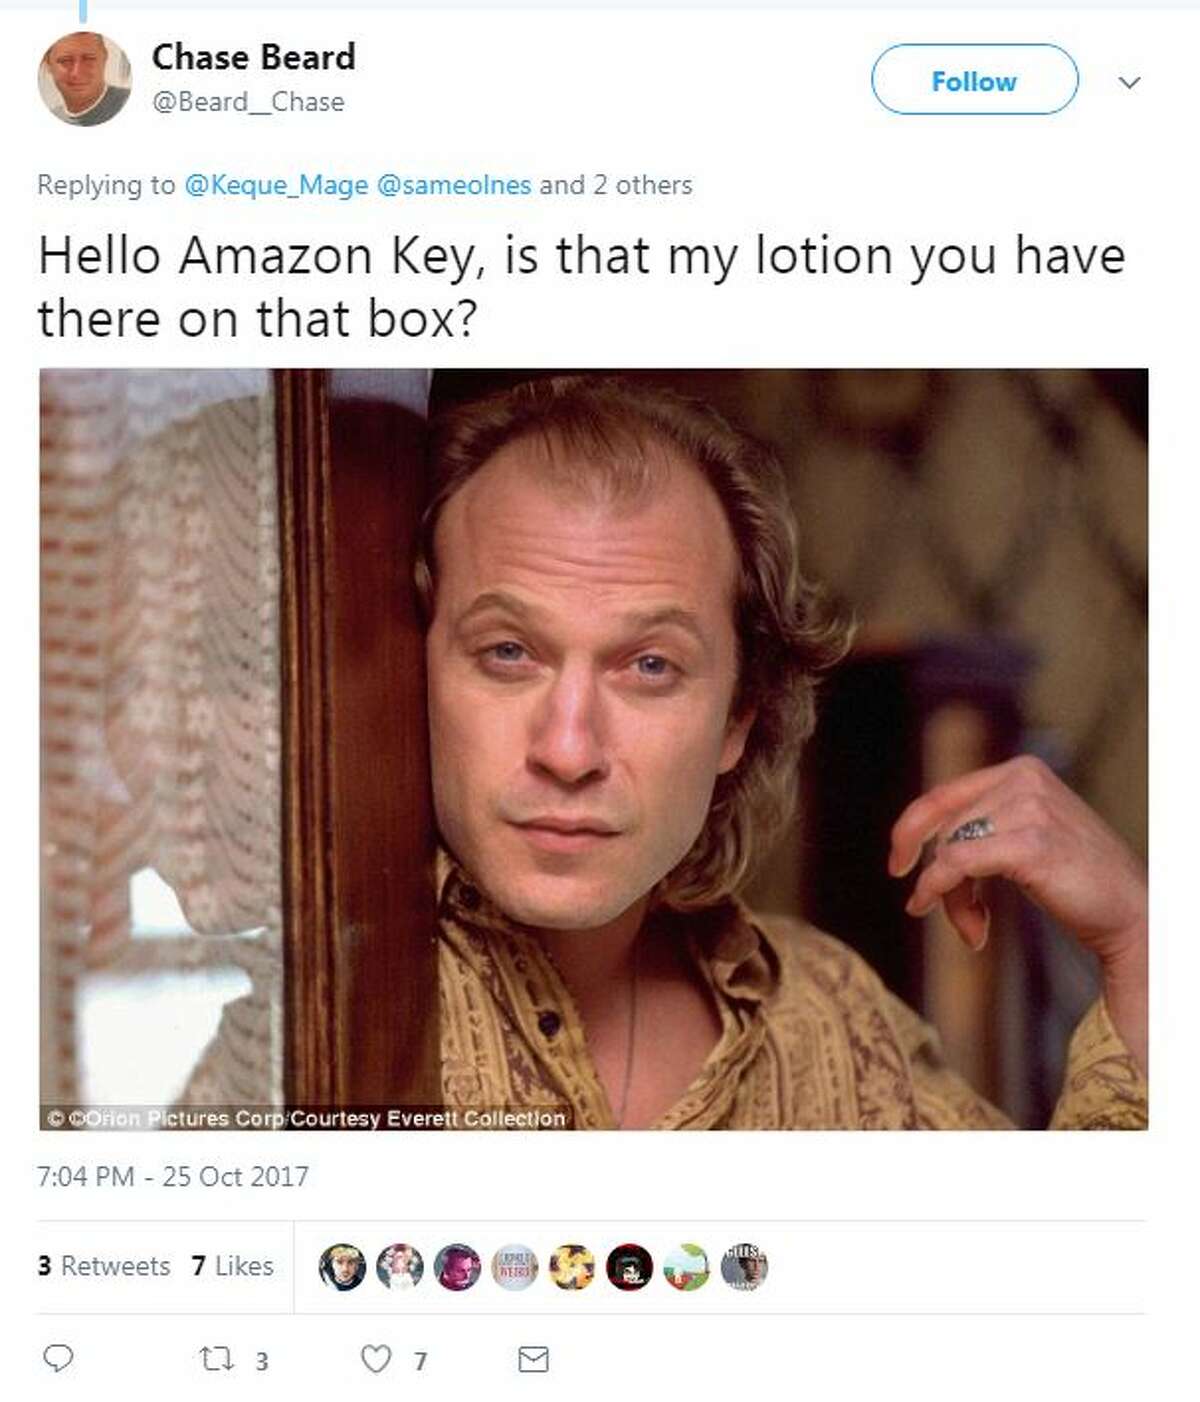 @Beard__Chase Replying to @Keque_Mage @sameolnes and 2 others Hello Amazon Key, is that my lotion you have there on that box?